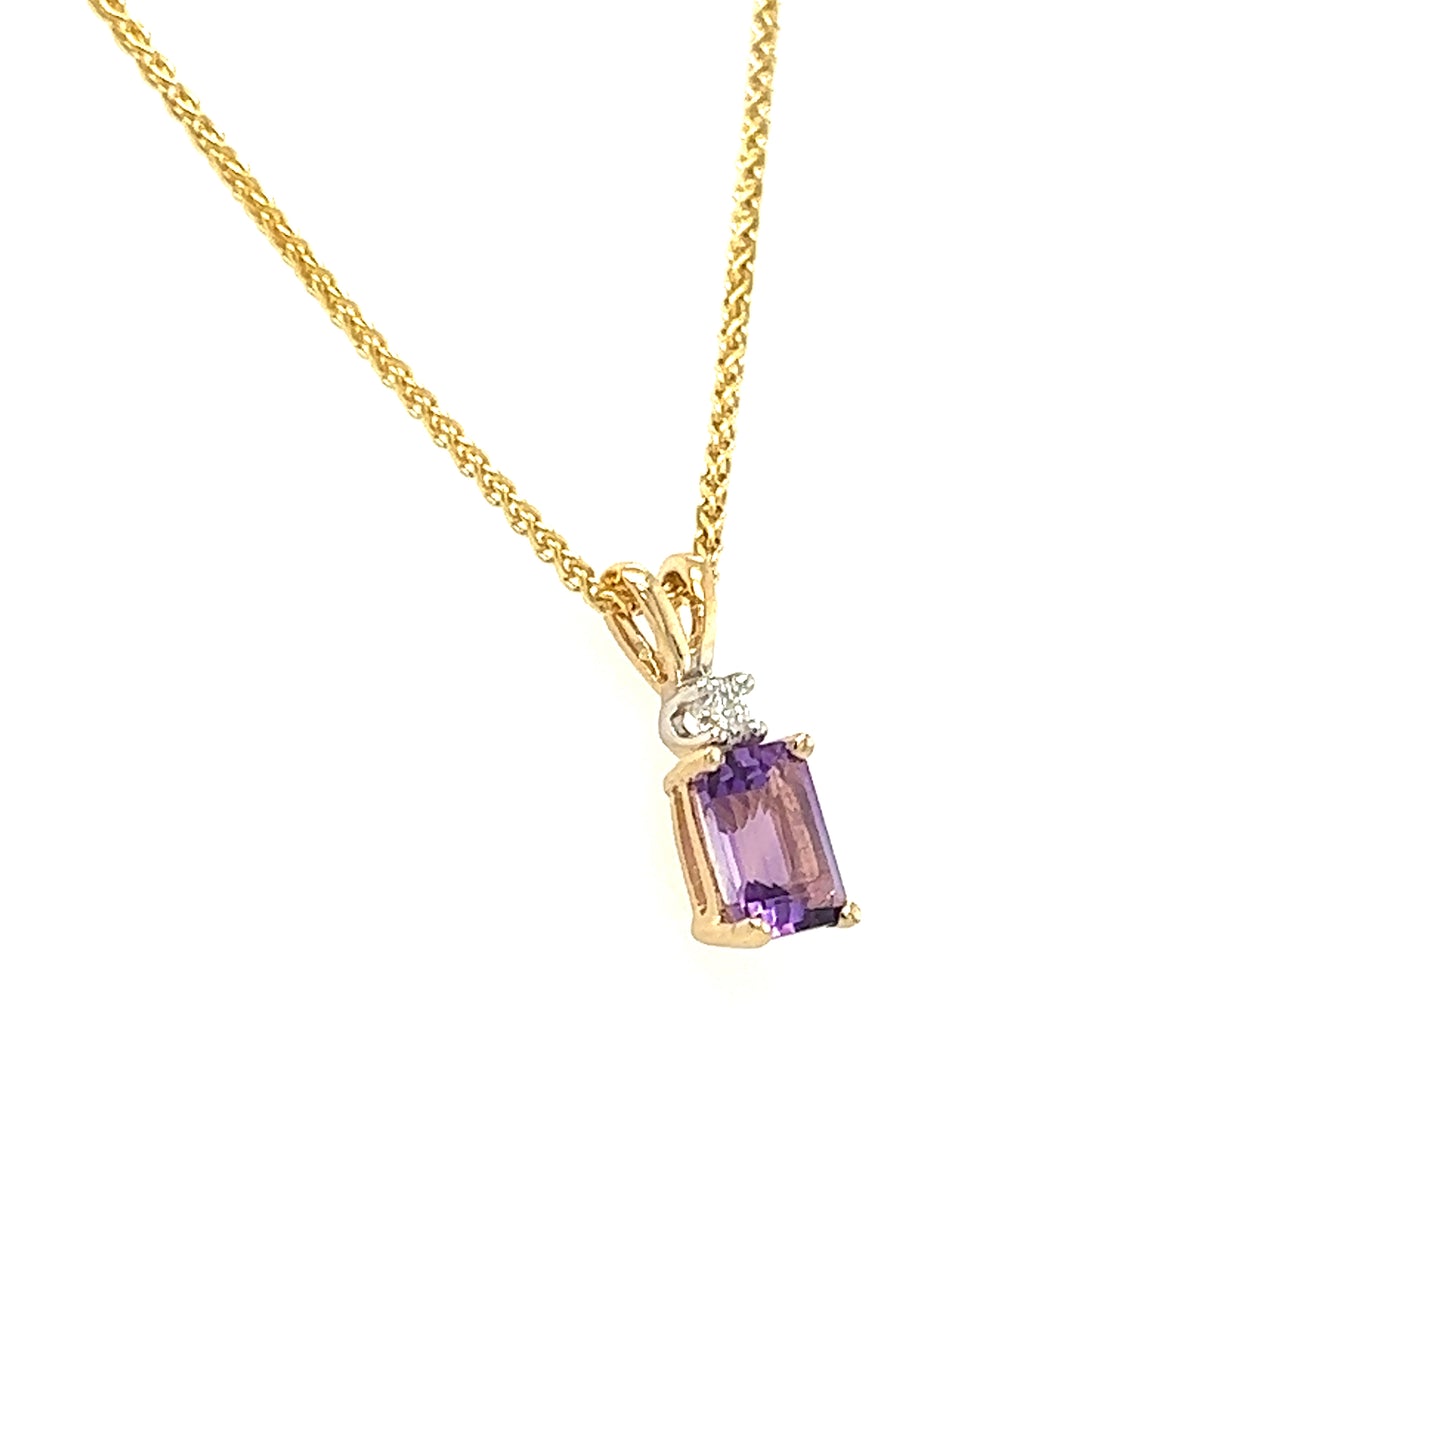 Baguette Amethyst Pendant with Diamond Accent is 14K Yellow Gold Pendant and Chain Left Side View